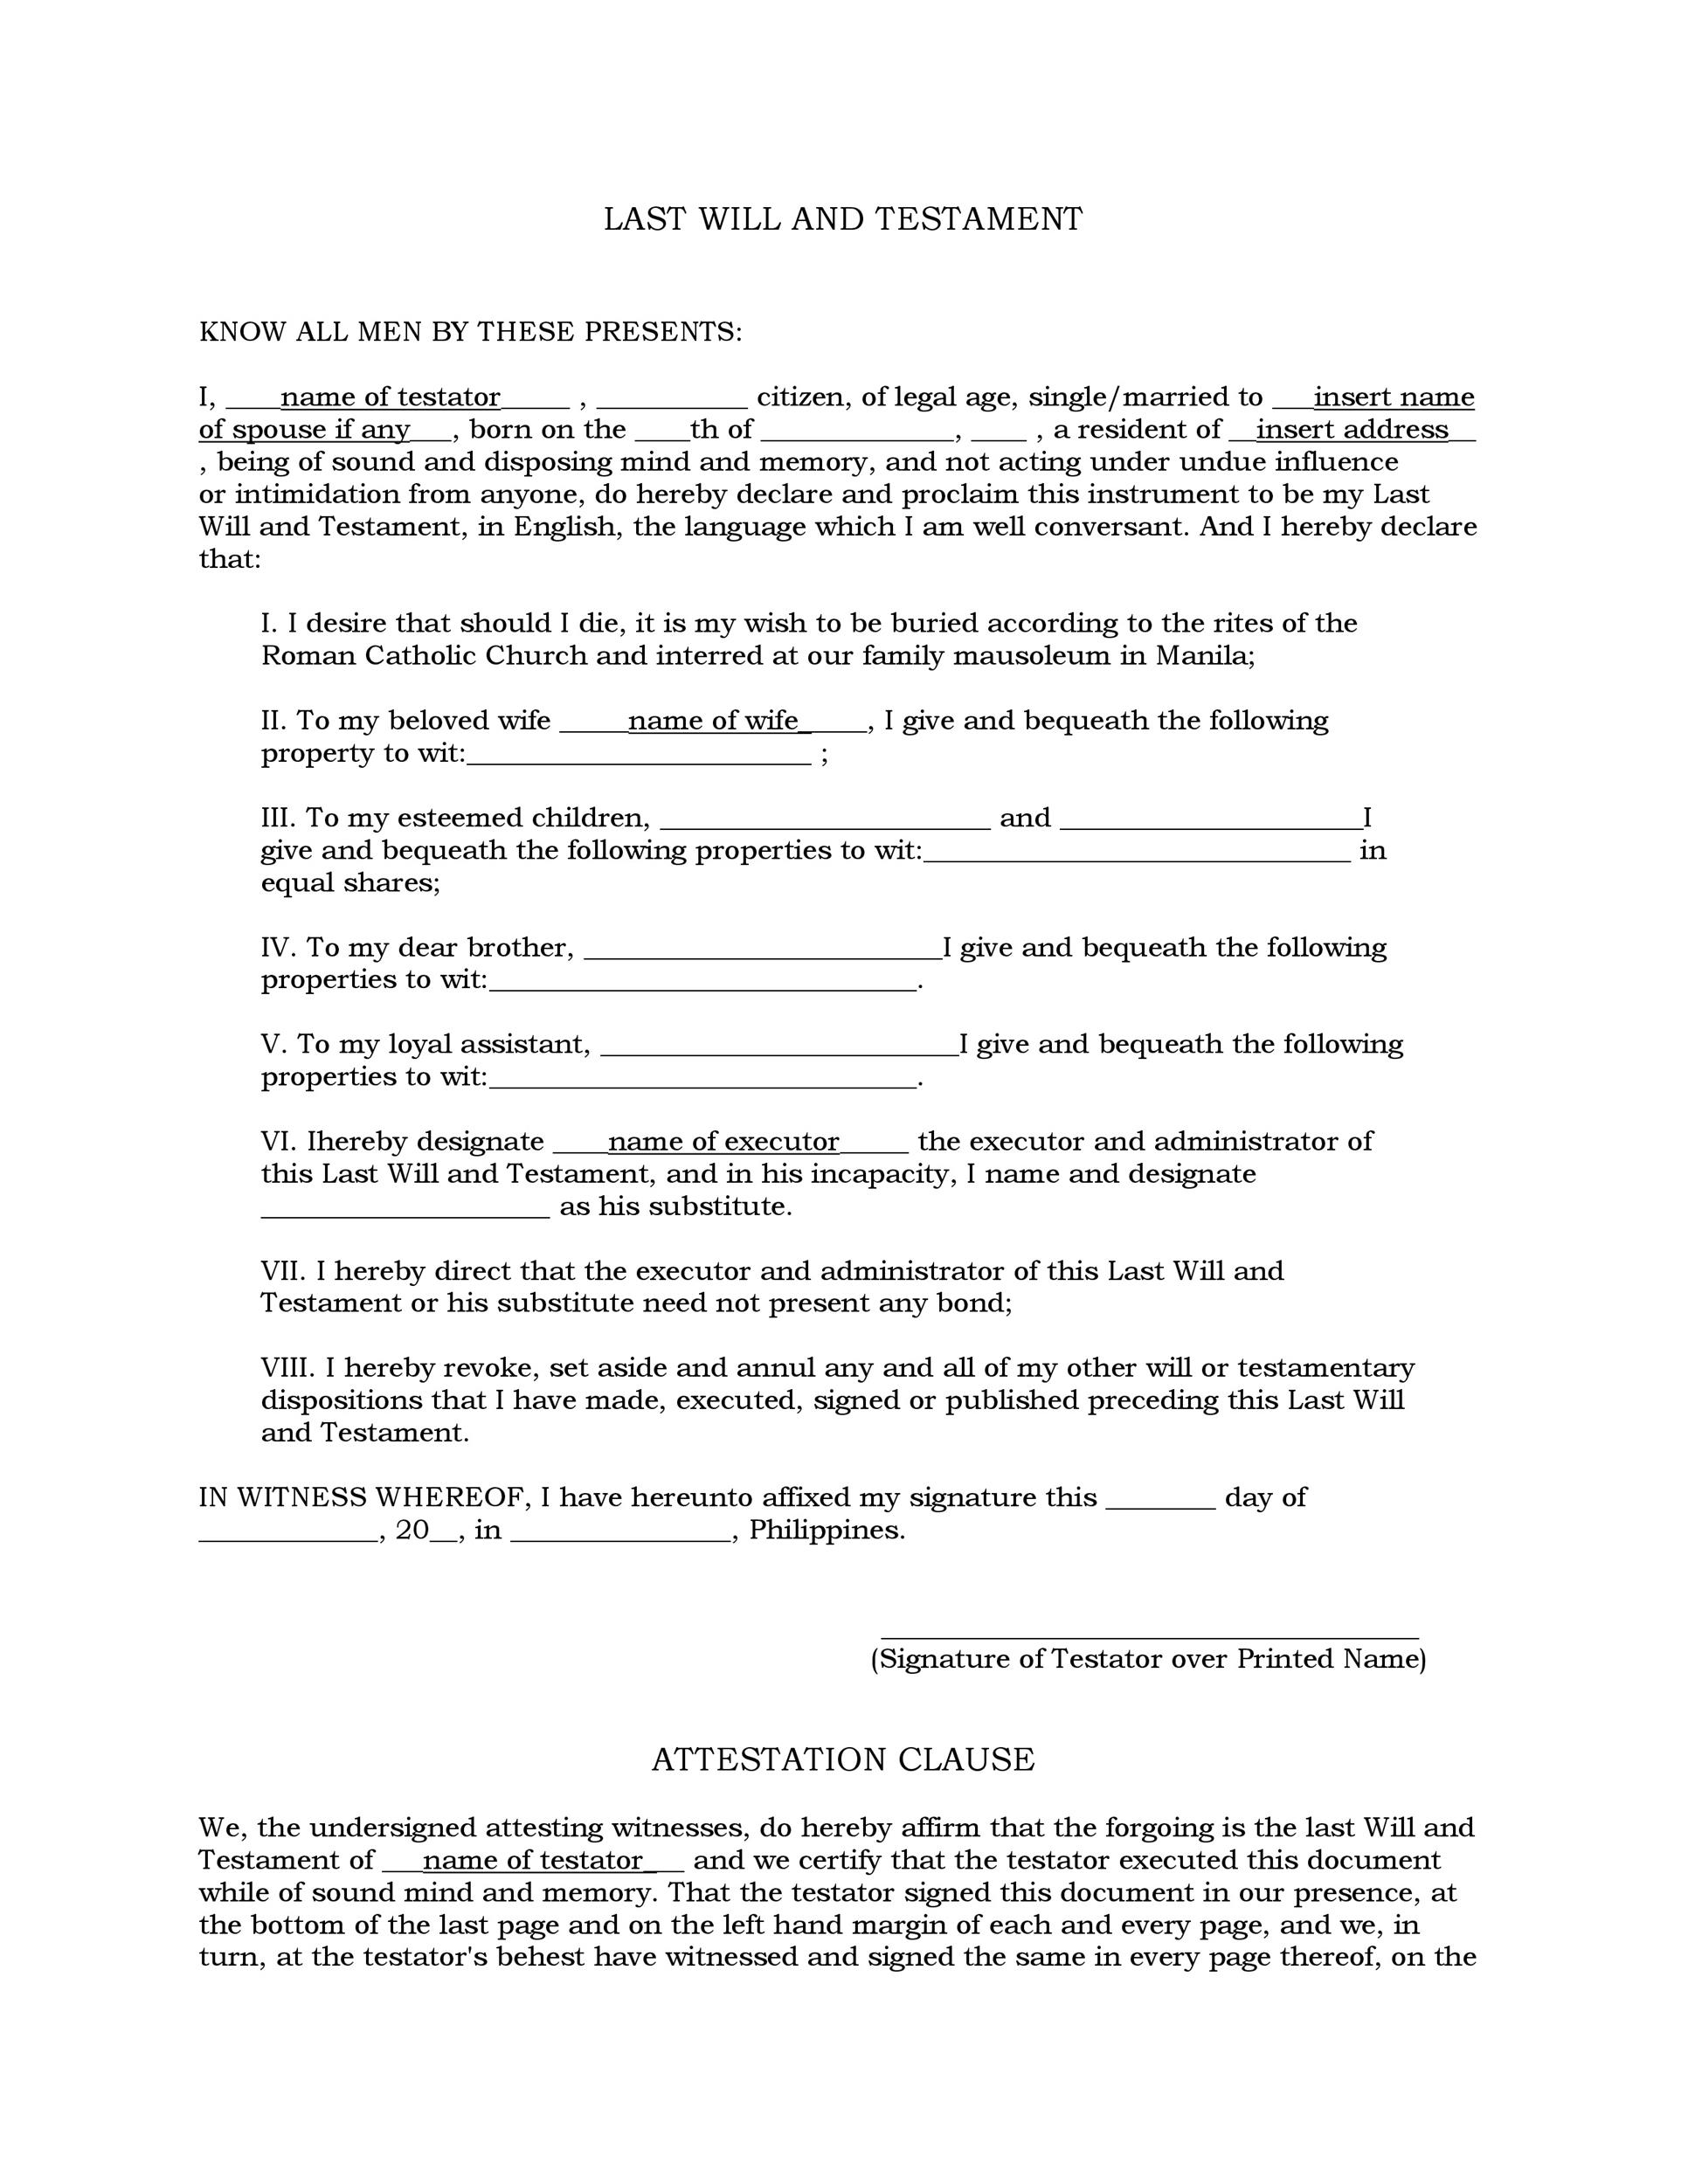 Free Last will and testament template 16